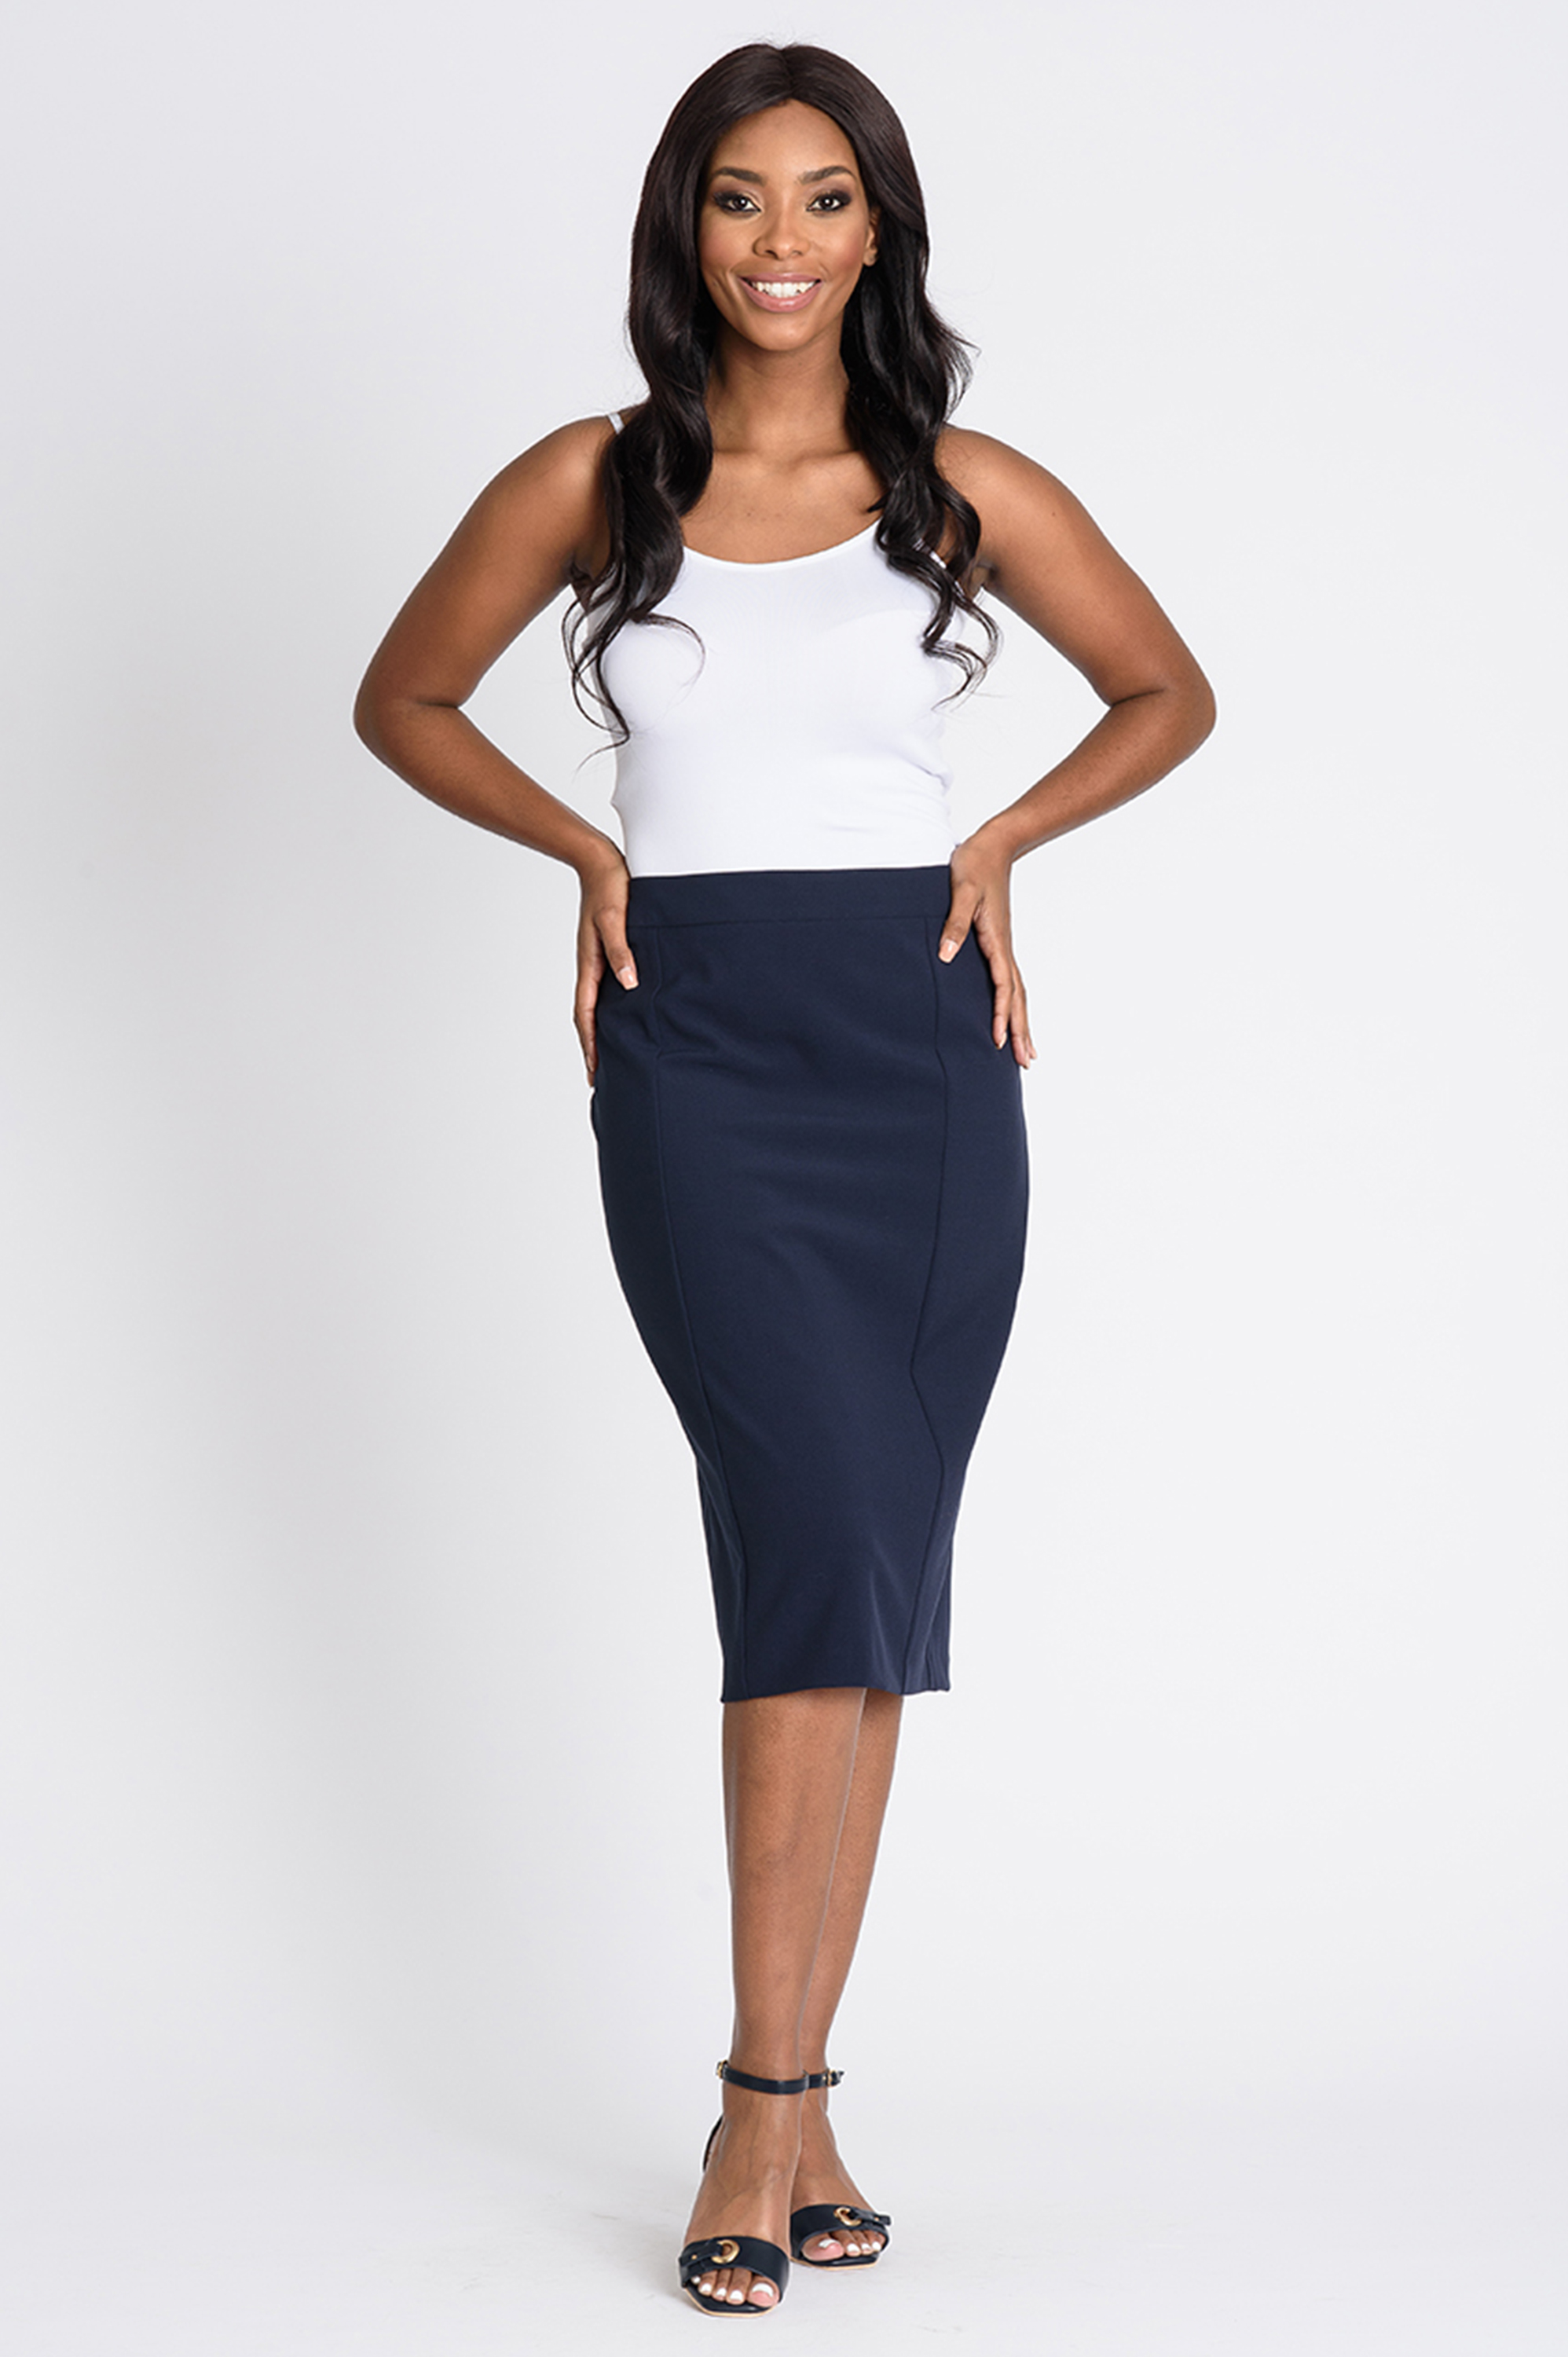 New 2 Way Stretch Navy Skirt | Contempo Online